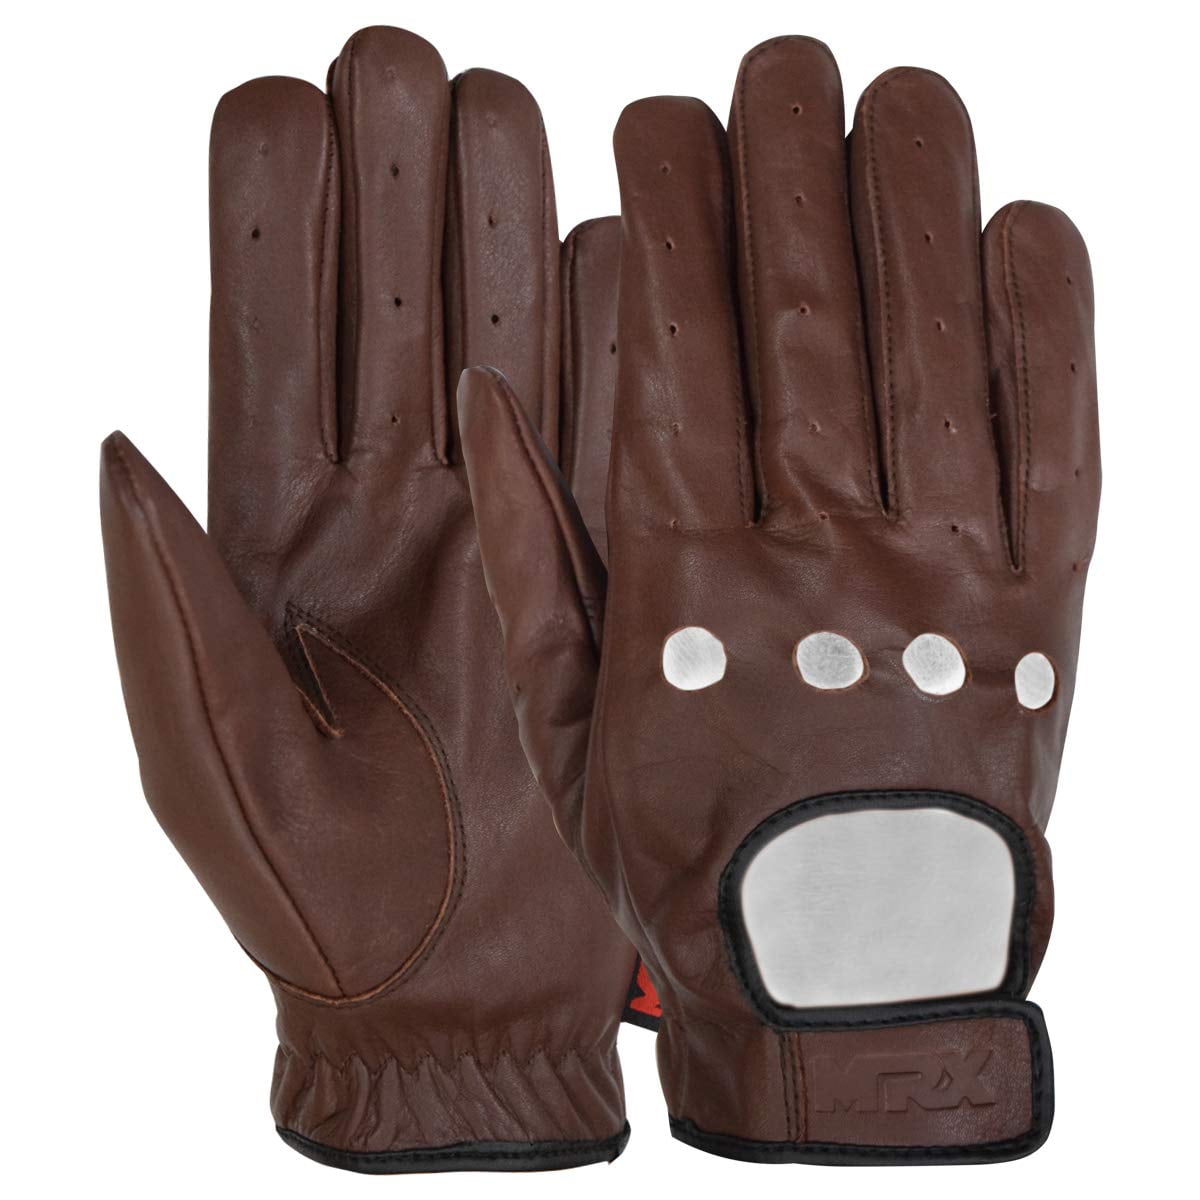 Men's Unlined Goat Leather Driving Gloves Tan 